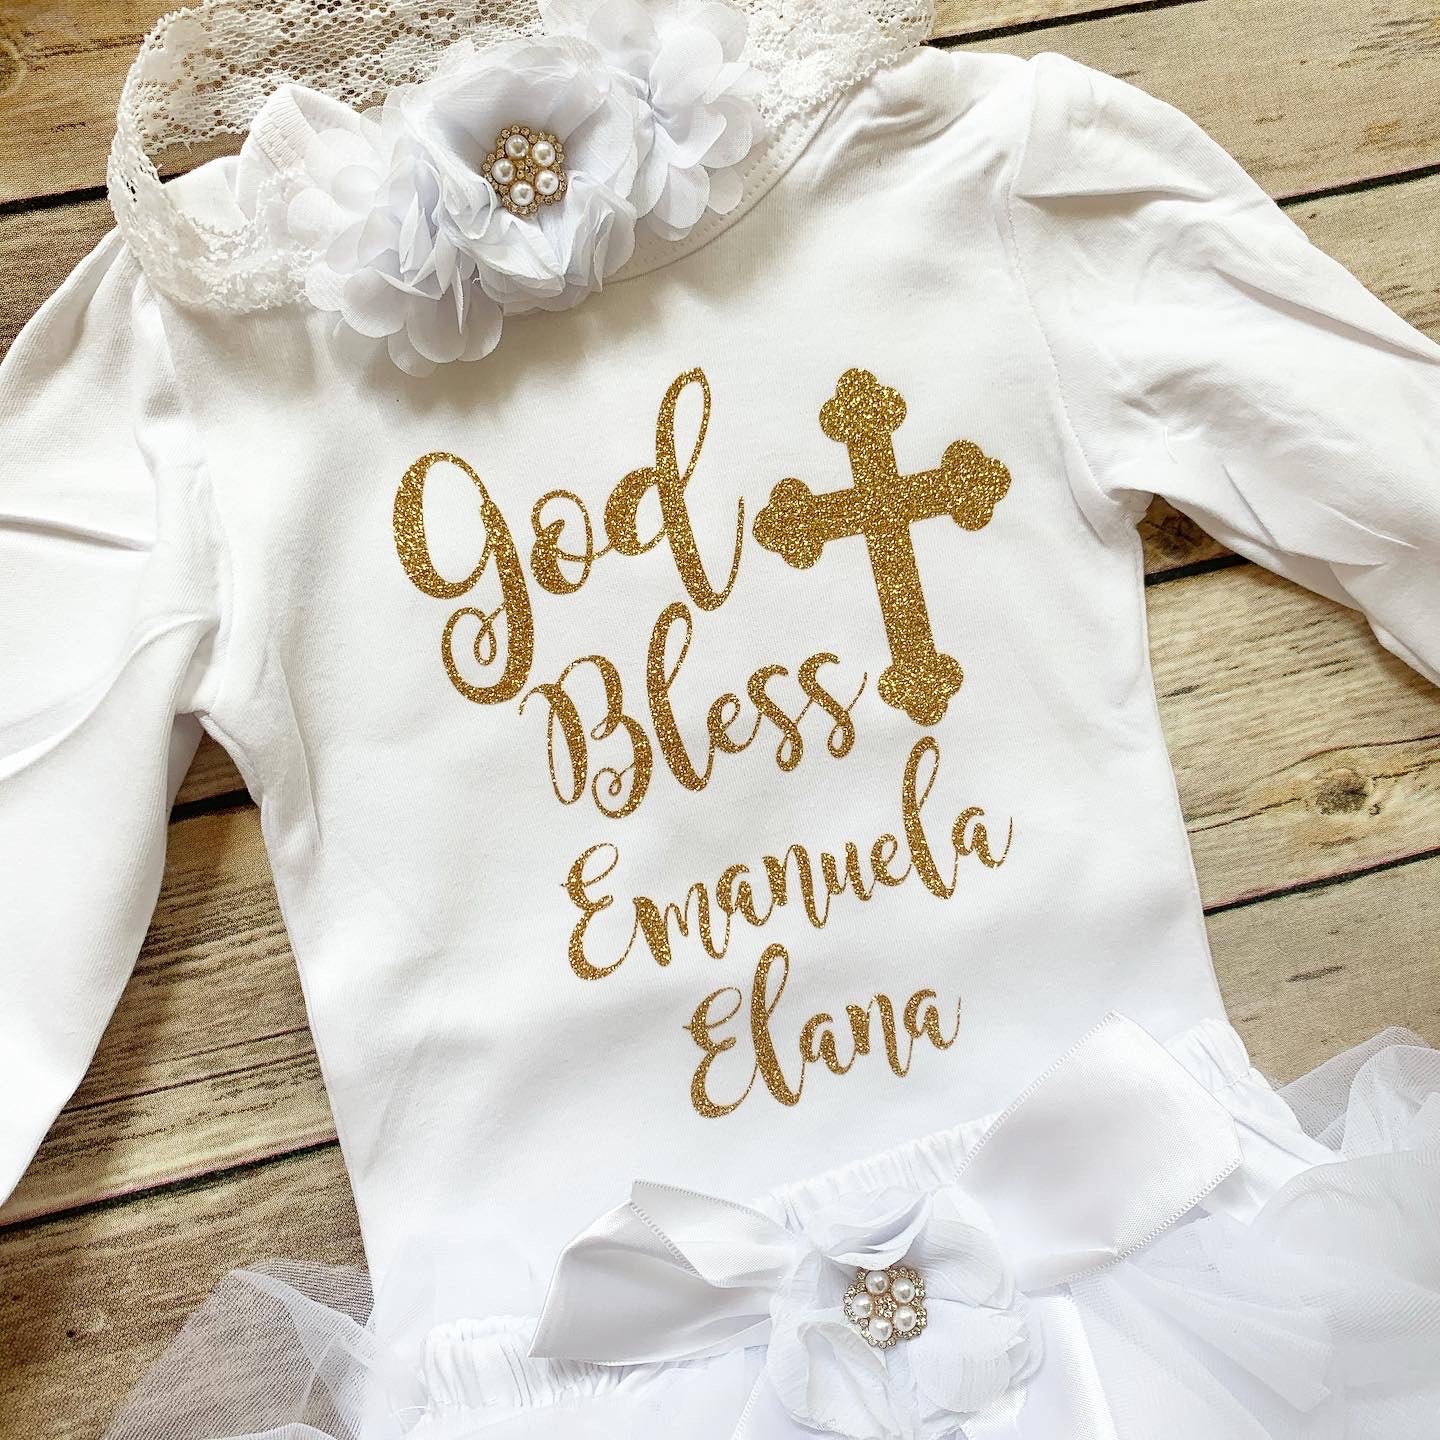 God bless- personalized gold